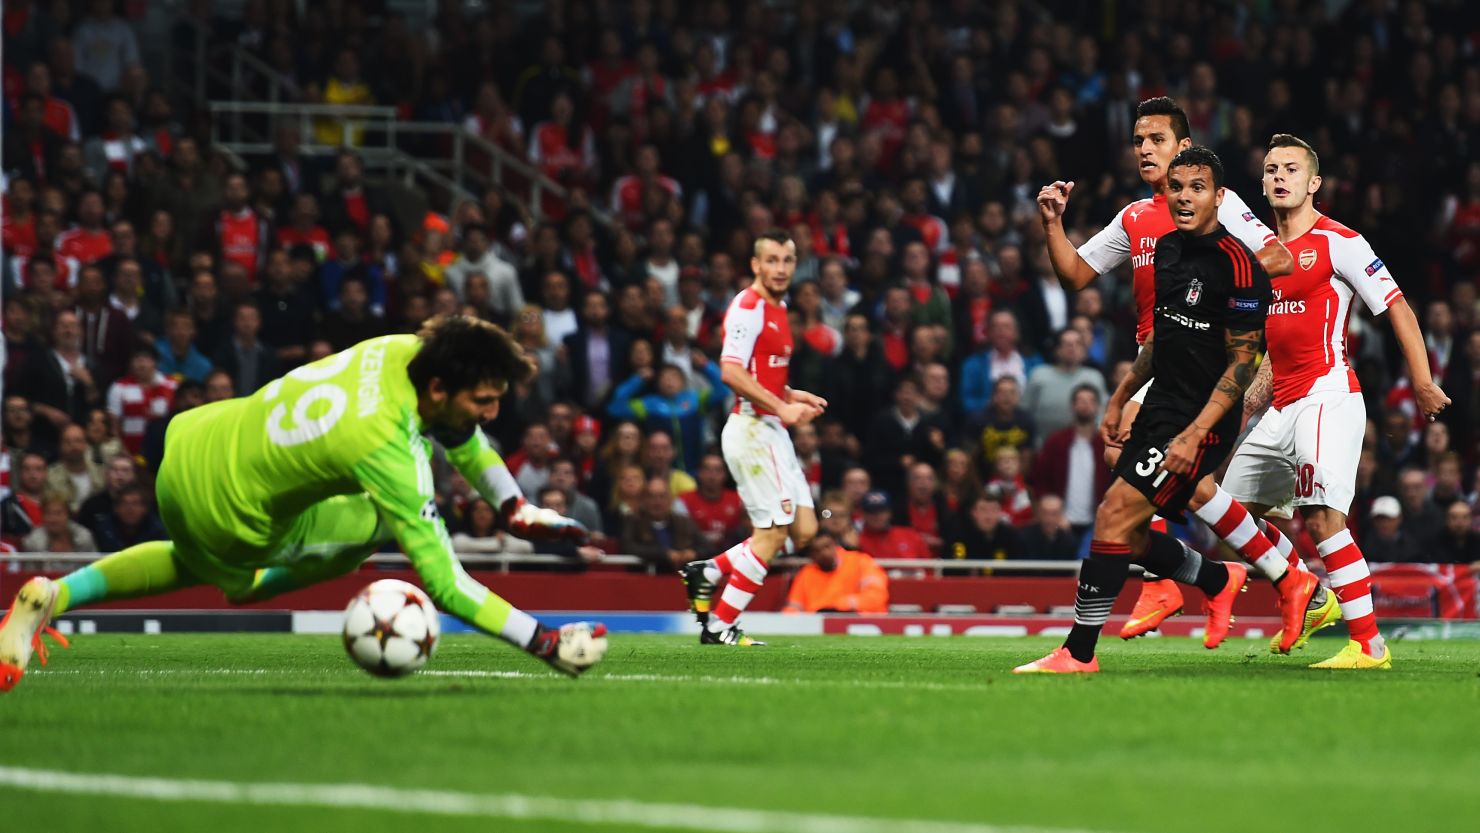 Alexis Sanchez fires home his first goal for Arsenal in its Champions League tie with Besiktas.